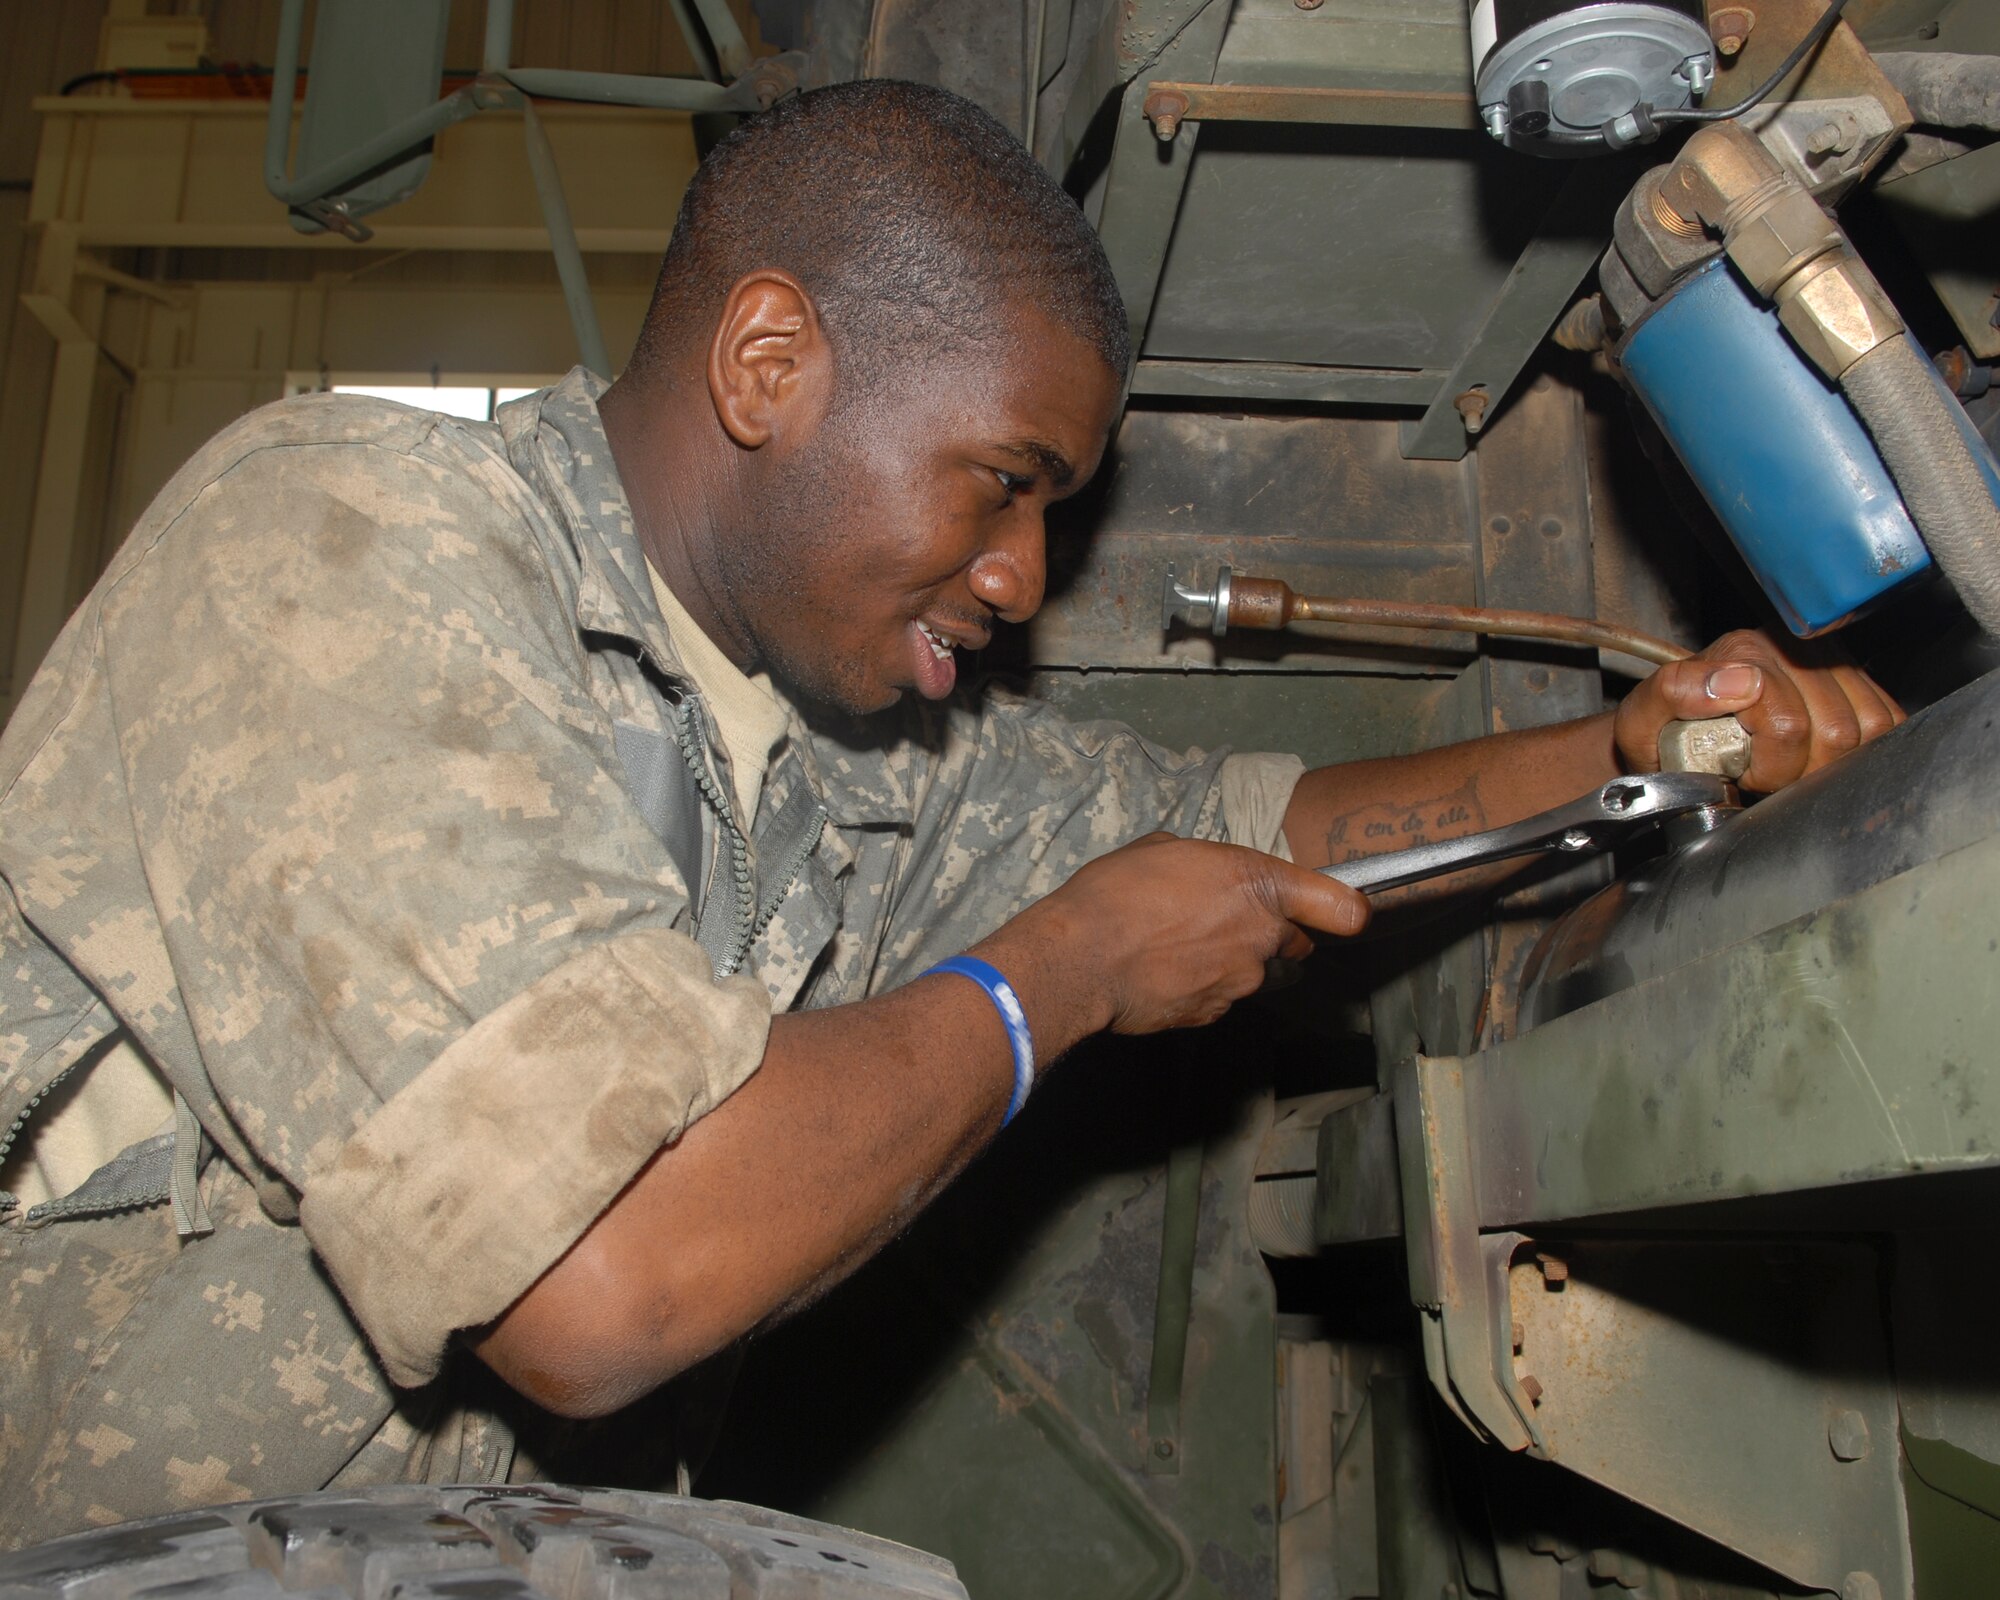 KUNSAN AIR BASE, Republic of Korea -- Specialist Danny McMillon, 2-1 Air Defense Artillery Alpha Battery mechanic, fixes a class 3 leak on an Antenna Mass Group 5-ton truck. All over Korea, Patriot Advanced Capability Launchers are used in defense of military installations. (U.S. Air Force photo/Senior Airman Roy Lynch)